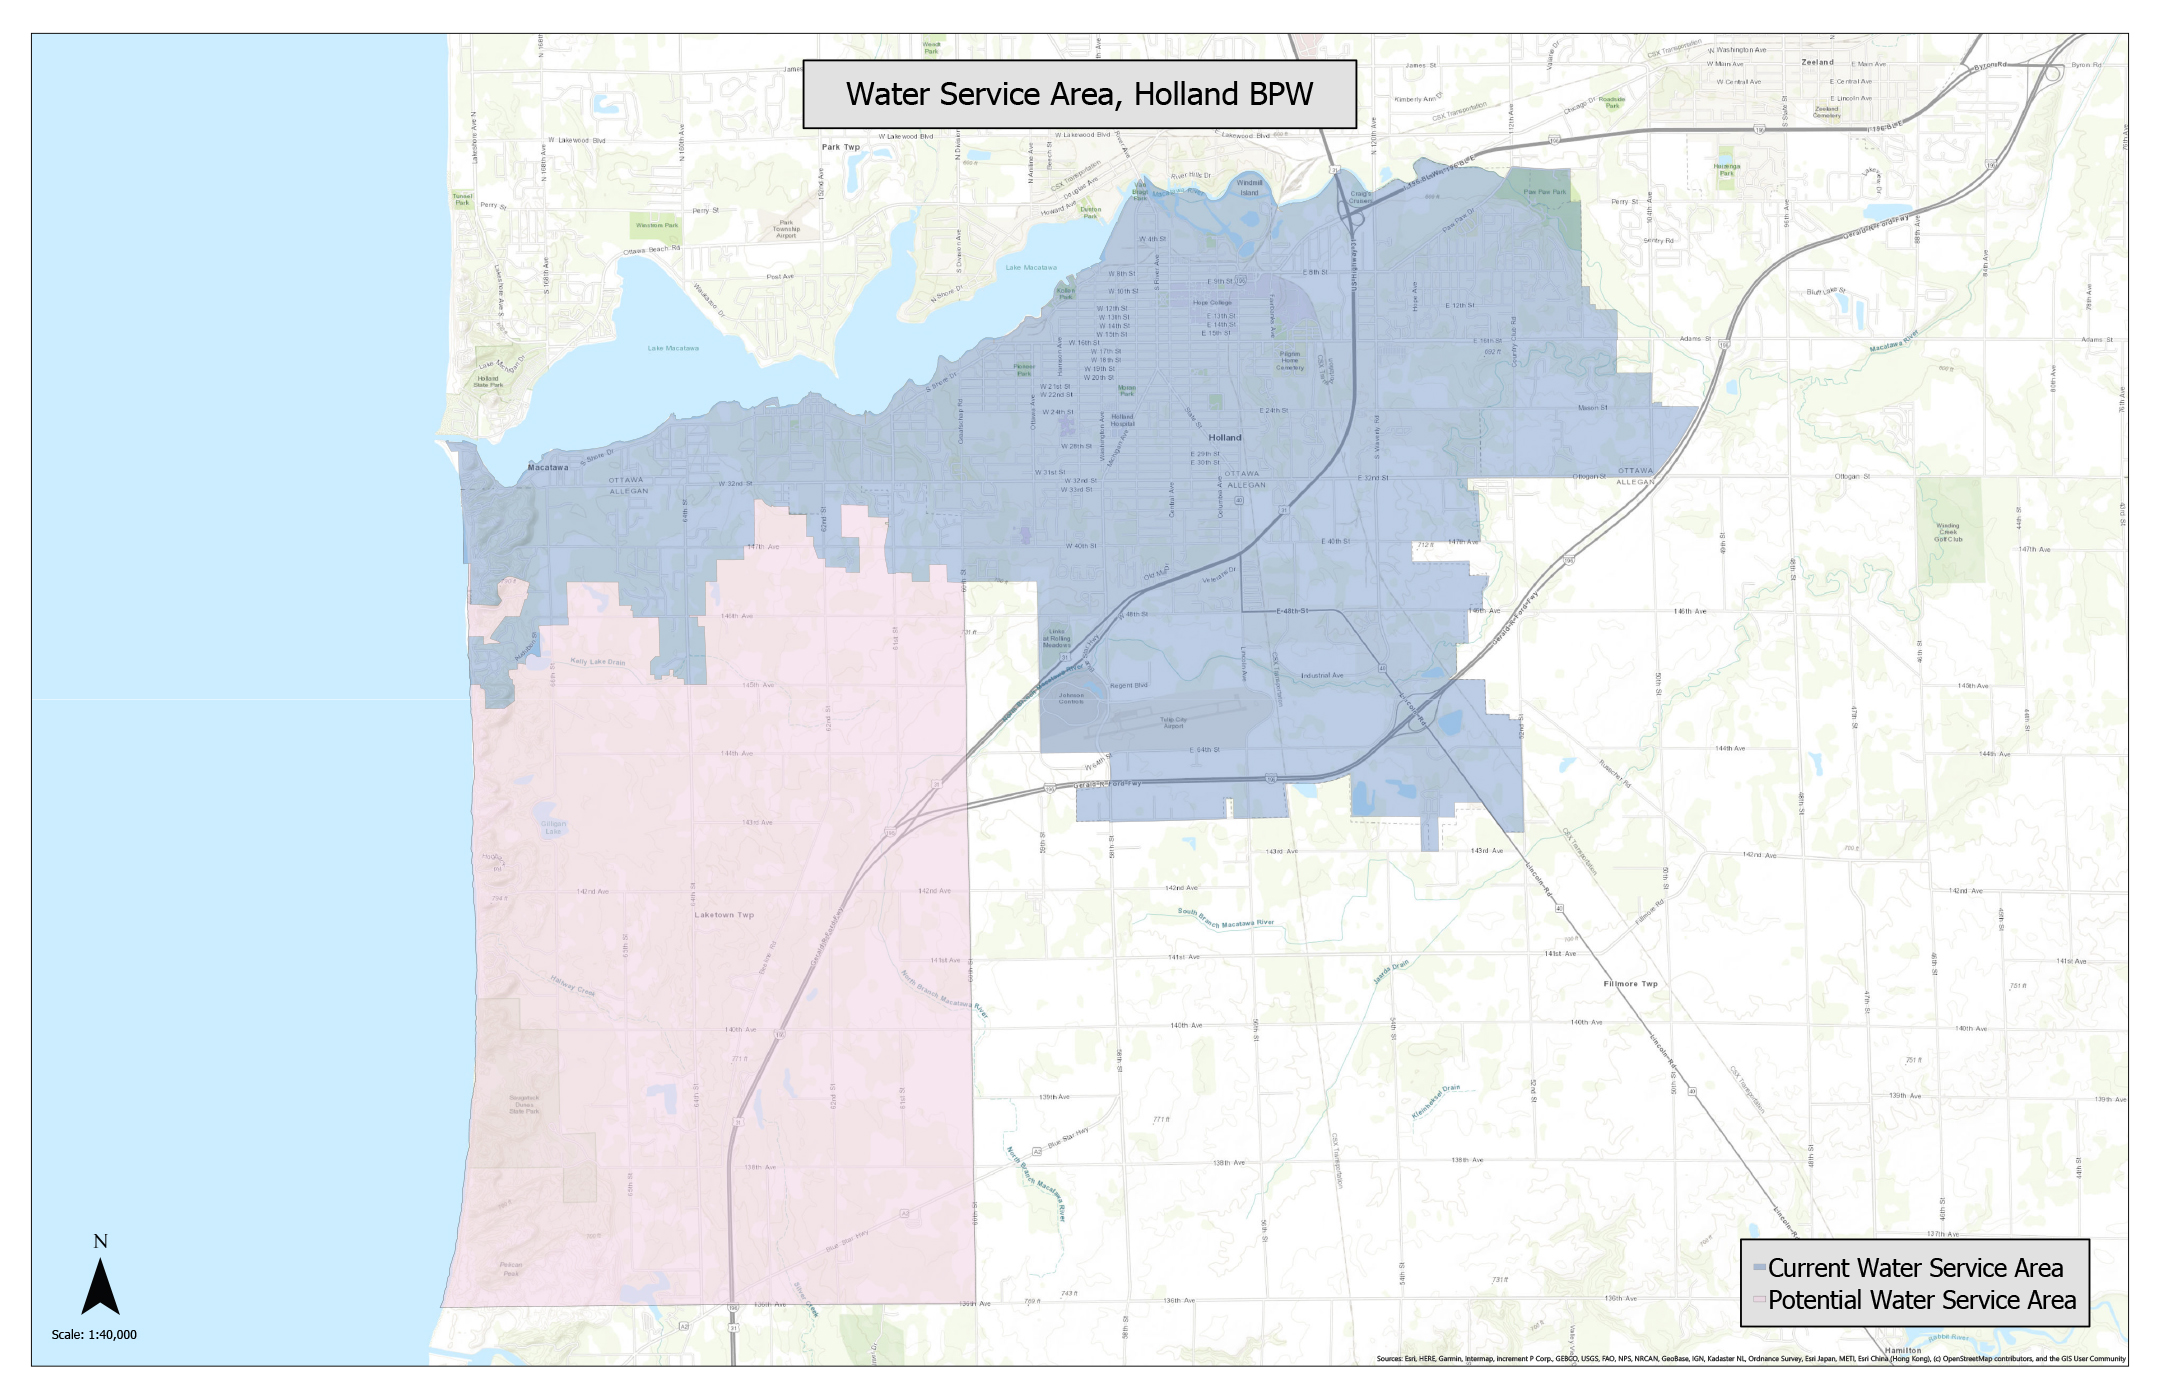 HBPW water service area map